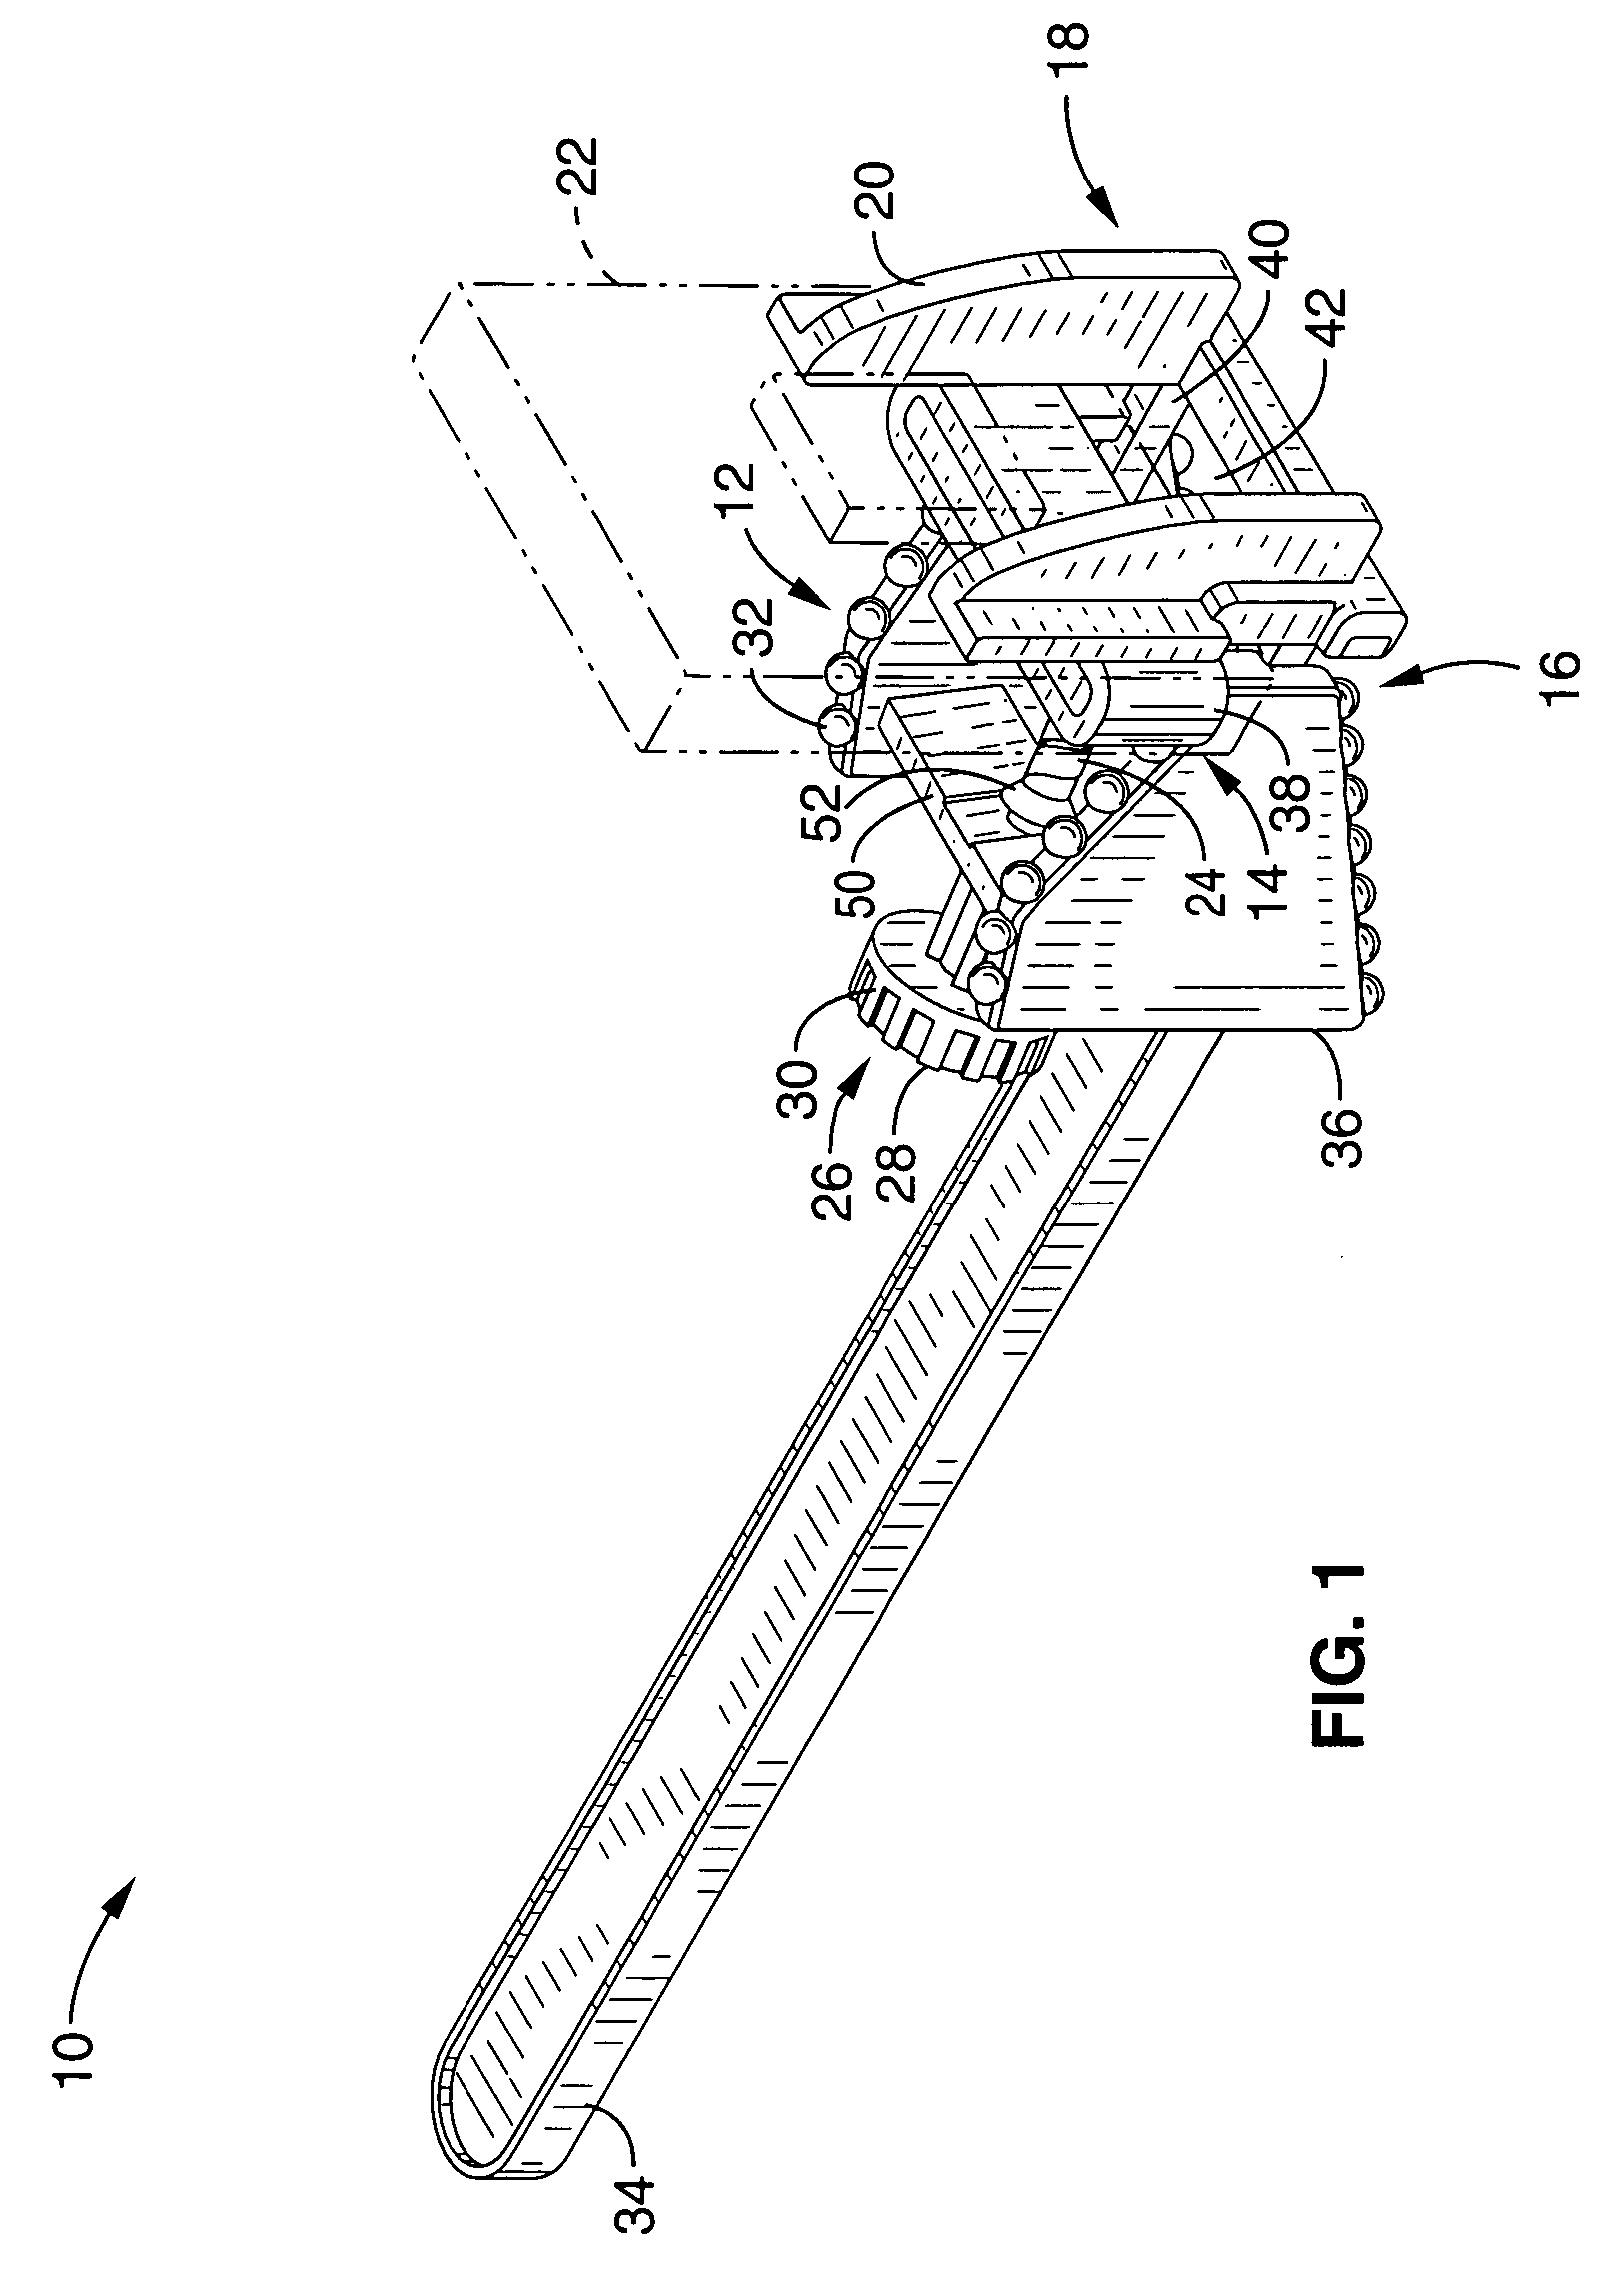 Apparatus for retaining a radiographic sensor during dental x-ray imaging